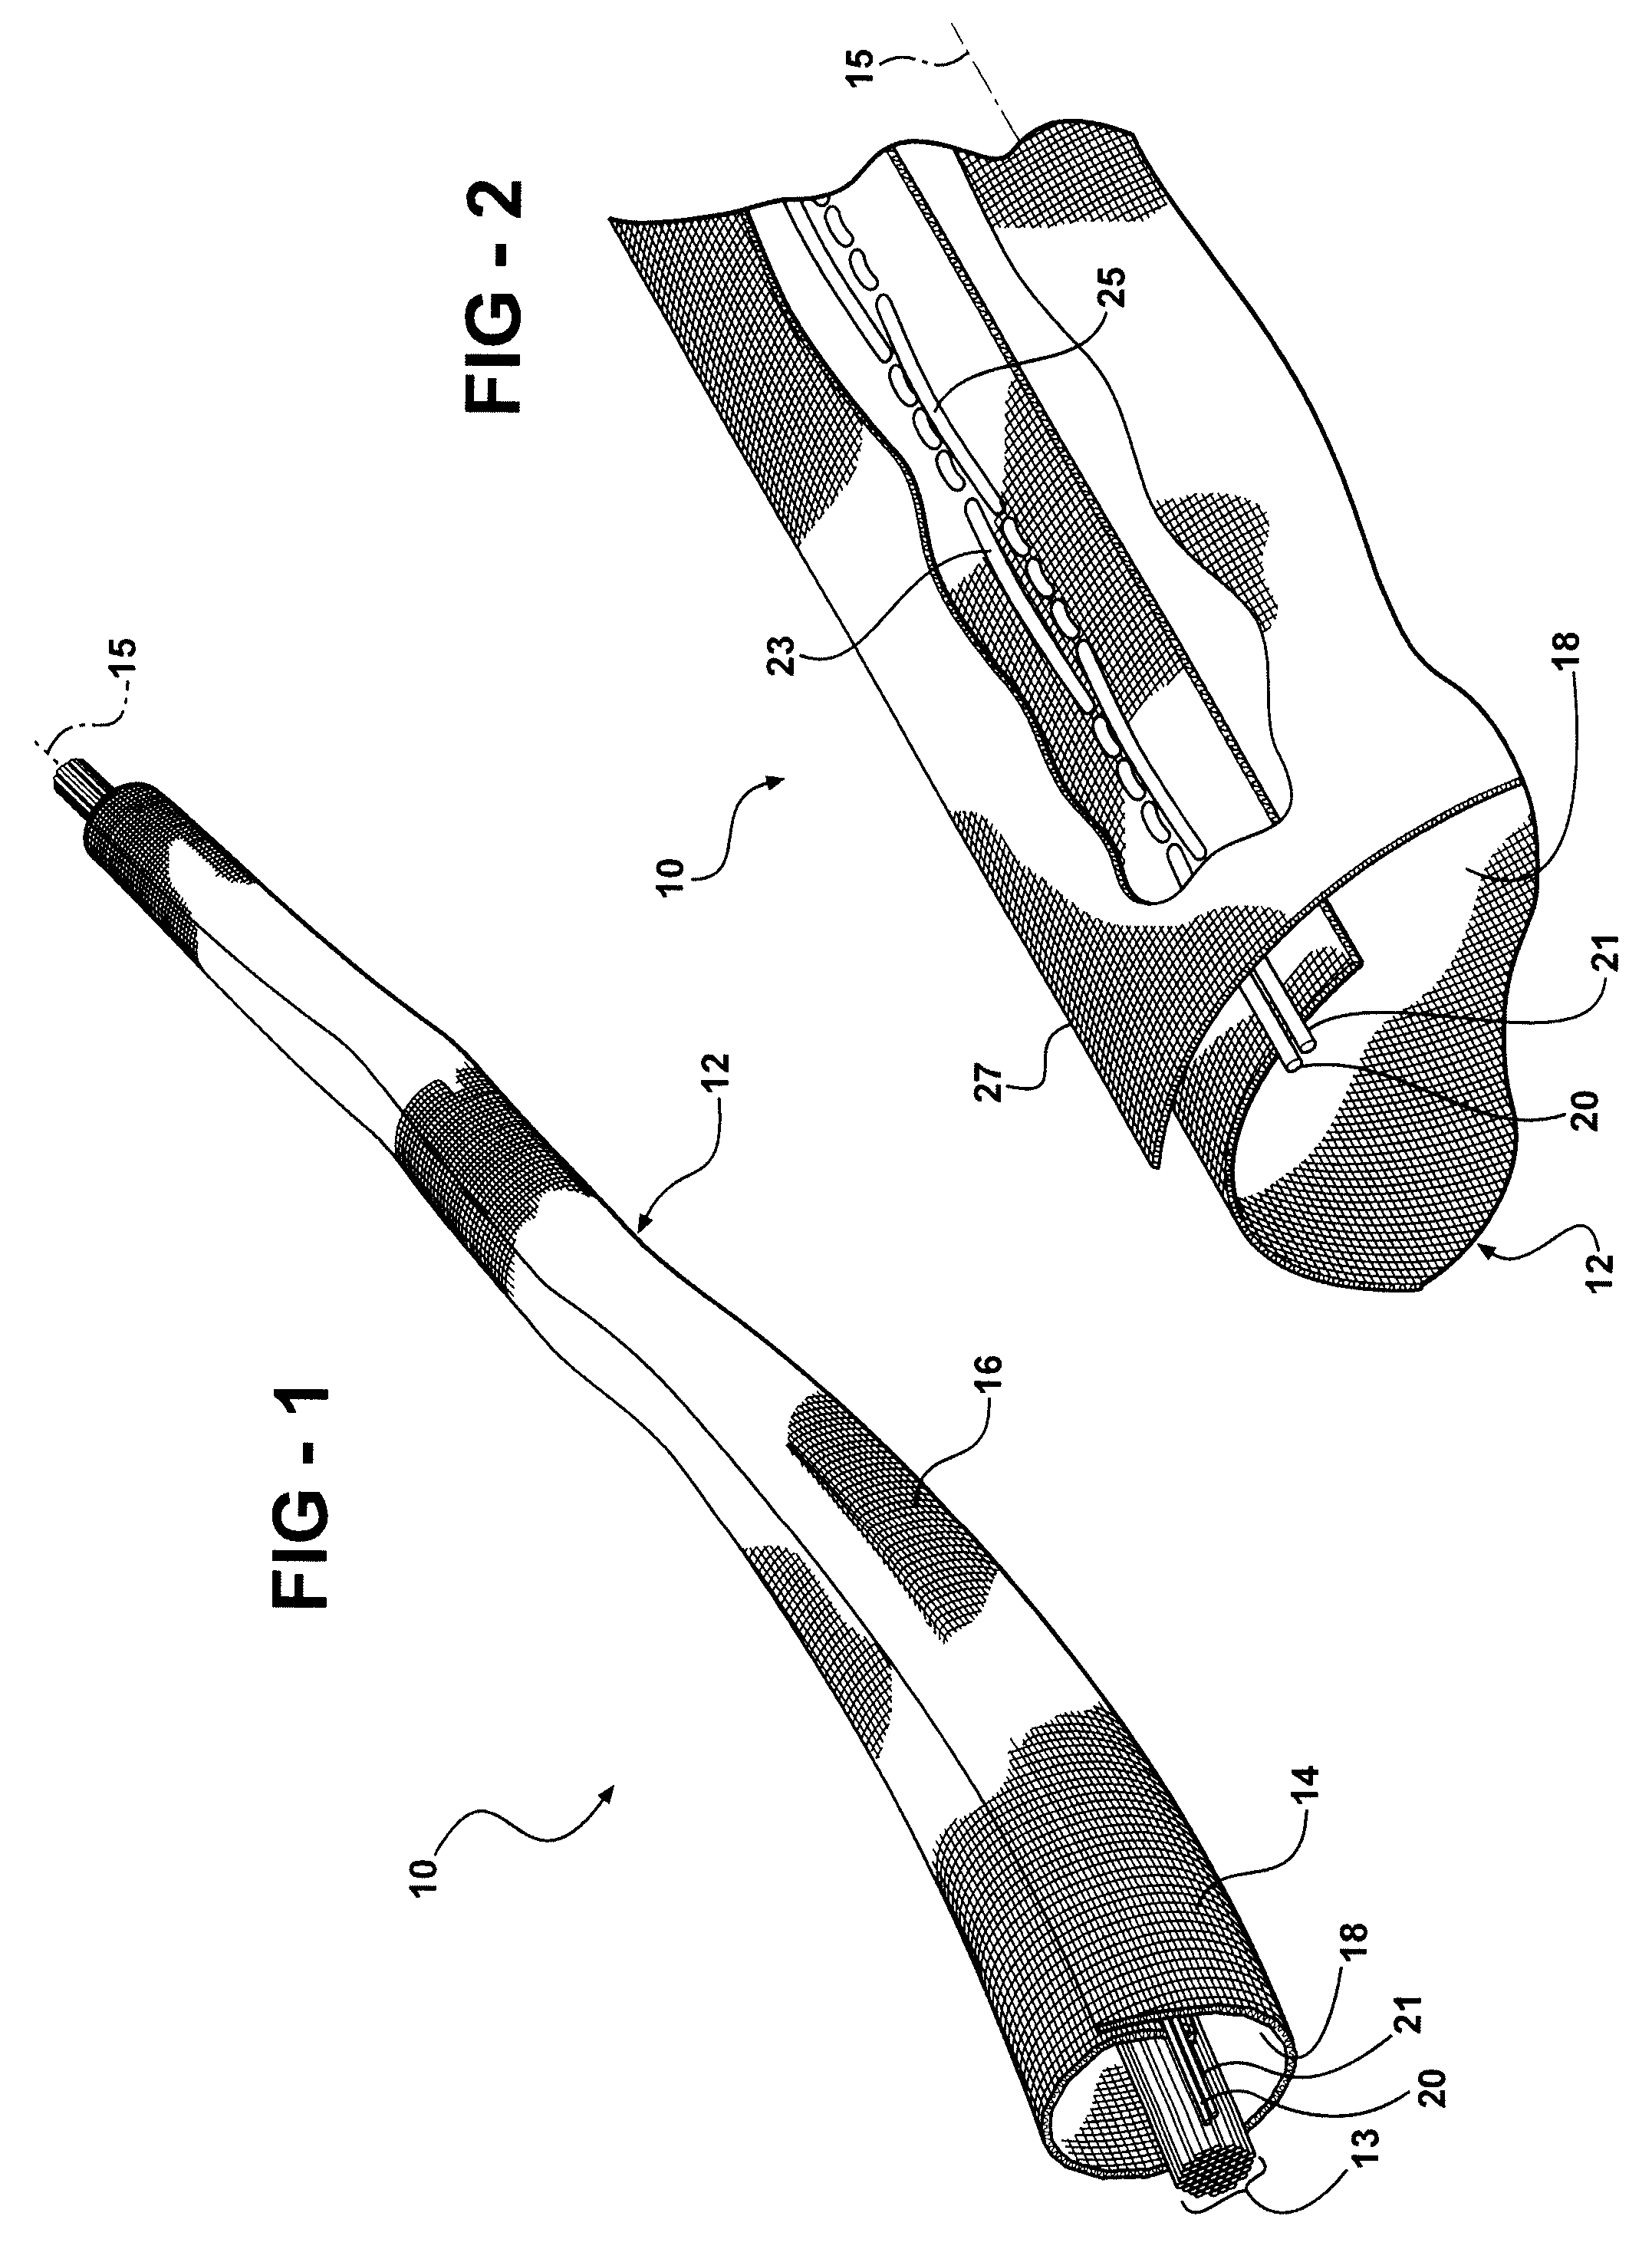 Protective sleeve fabricated with hybrid yarn having wire filaments and methods of construction